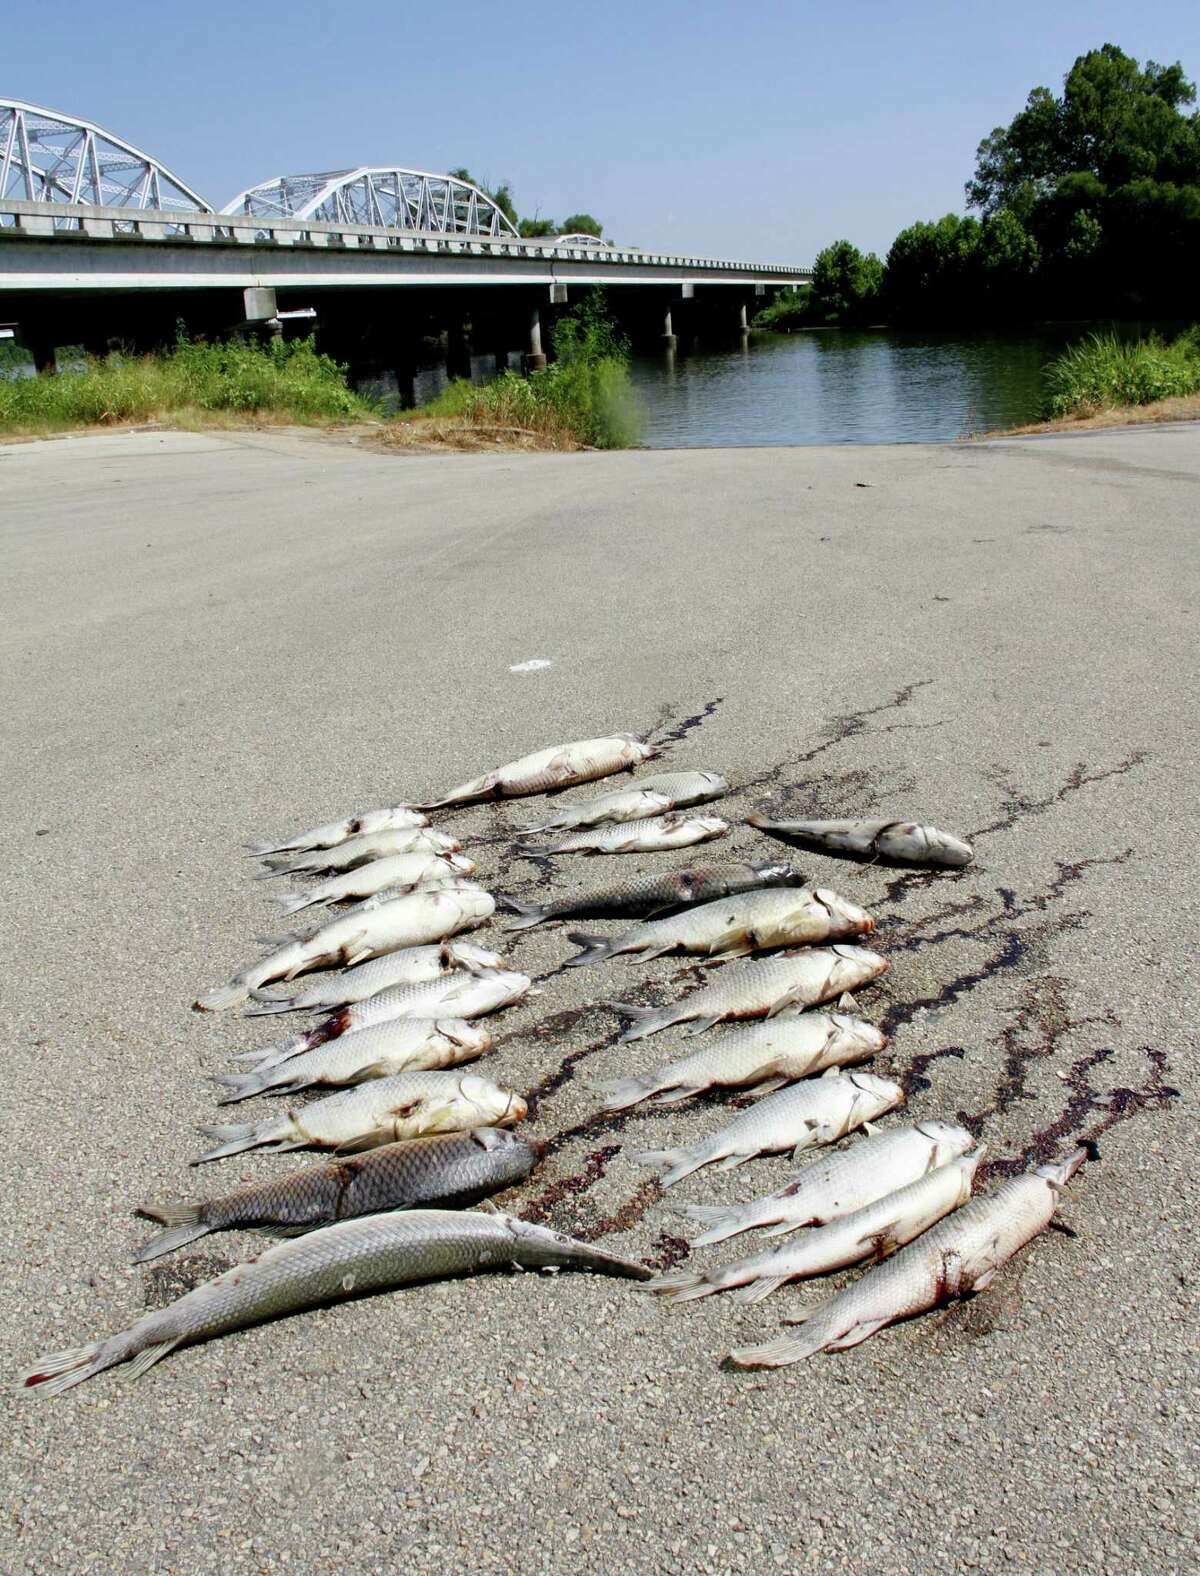 In an insult to the senses, angling ethics and the law, these bow-killed alligator and longnose gar, buffalo, common carp and bowfin, were left lined up, rotting in the summer sun and blocking a portion of a boat ramp on the Trinity River.